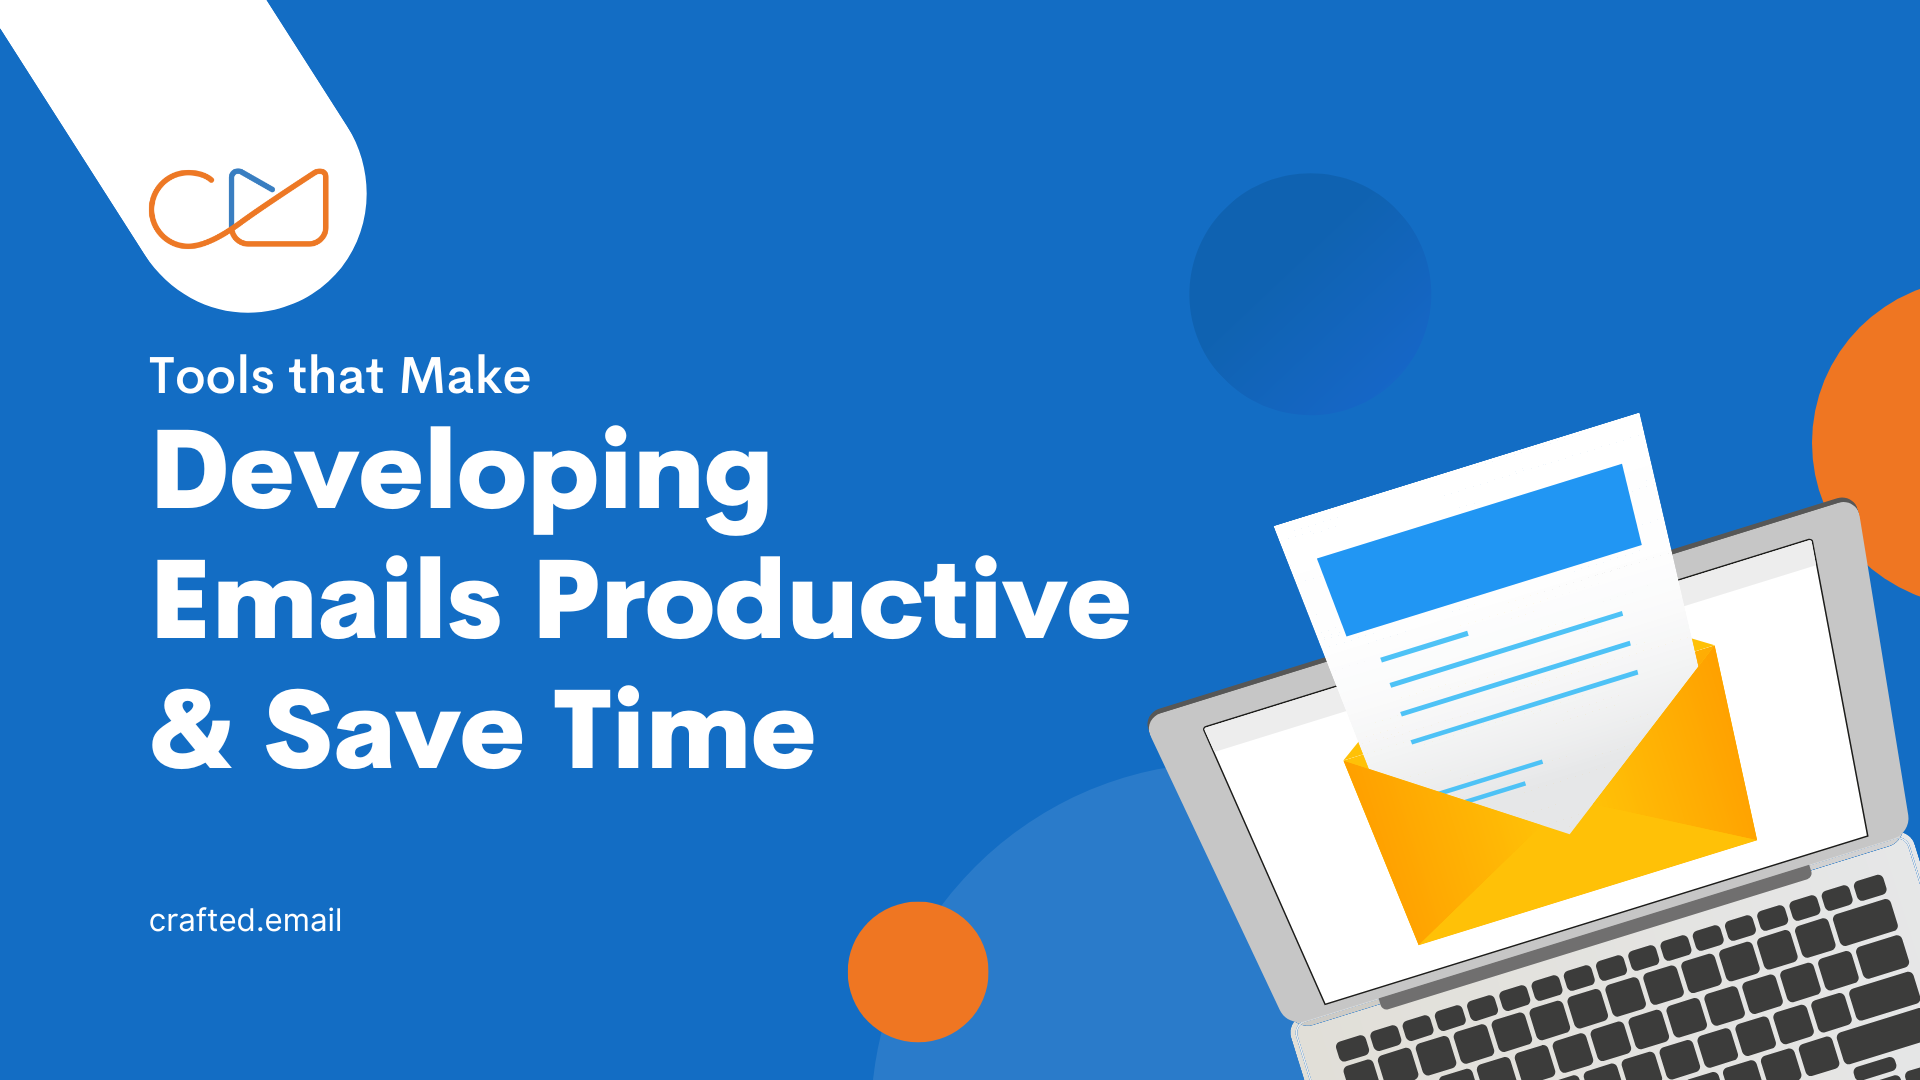 Tools that make Developing Emails Productive and Save Time